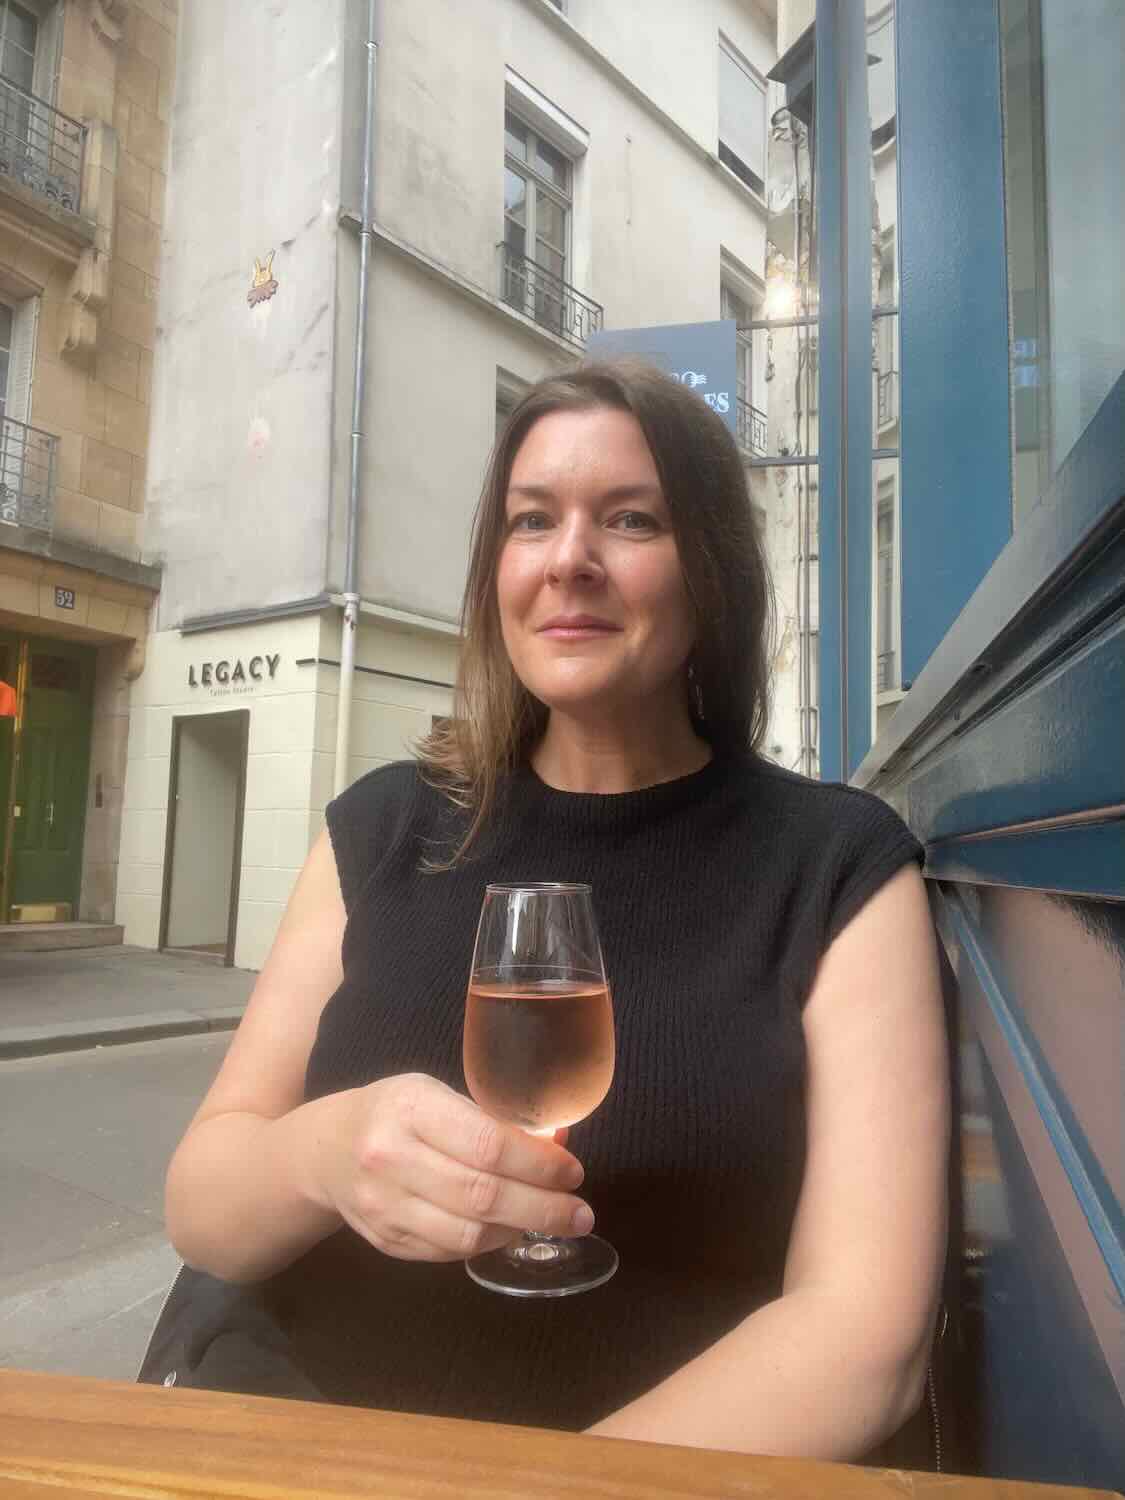 A woman sitting outside a cafe in Paris, holding a glass of rosé wine and smiling at the camera. The street and building facades can be seen in the background.